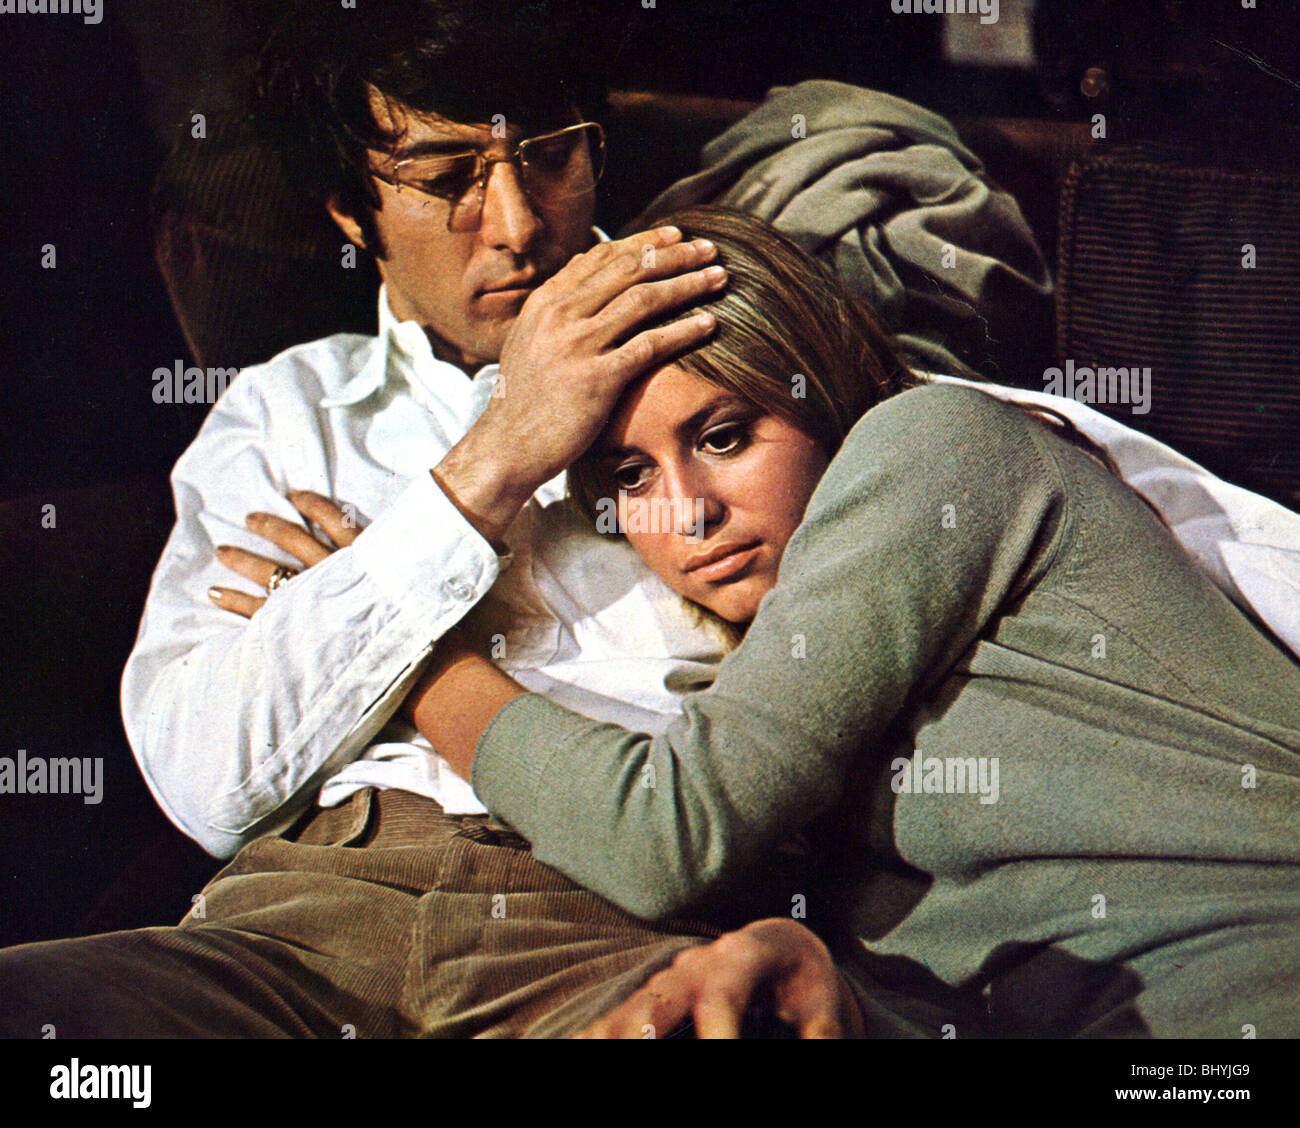 STRAW DOGS - 1971 Talen Associates film with Dustin Hoffman and Susan George Stock Photo